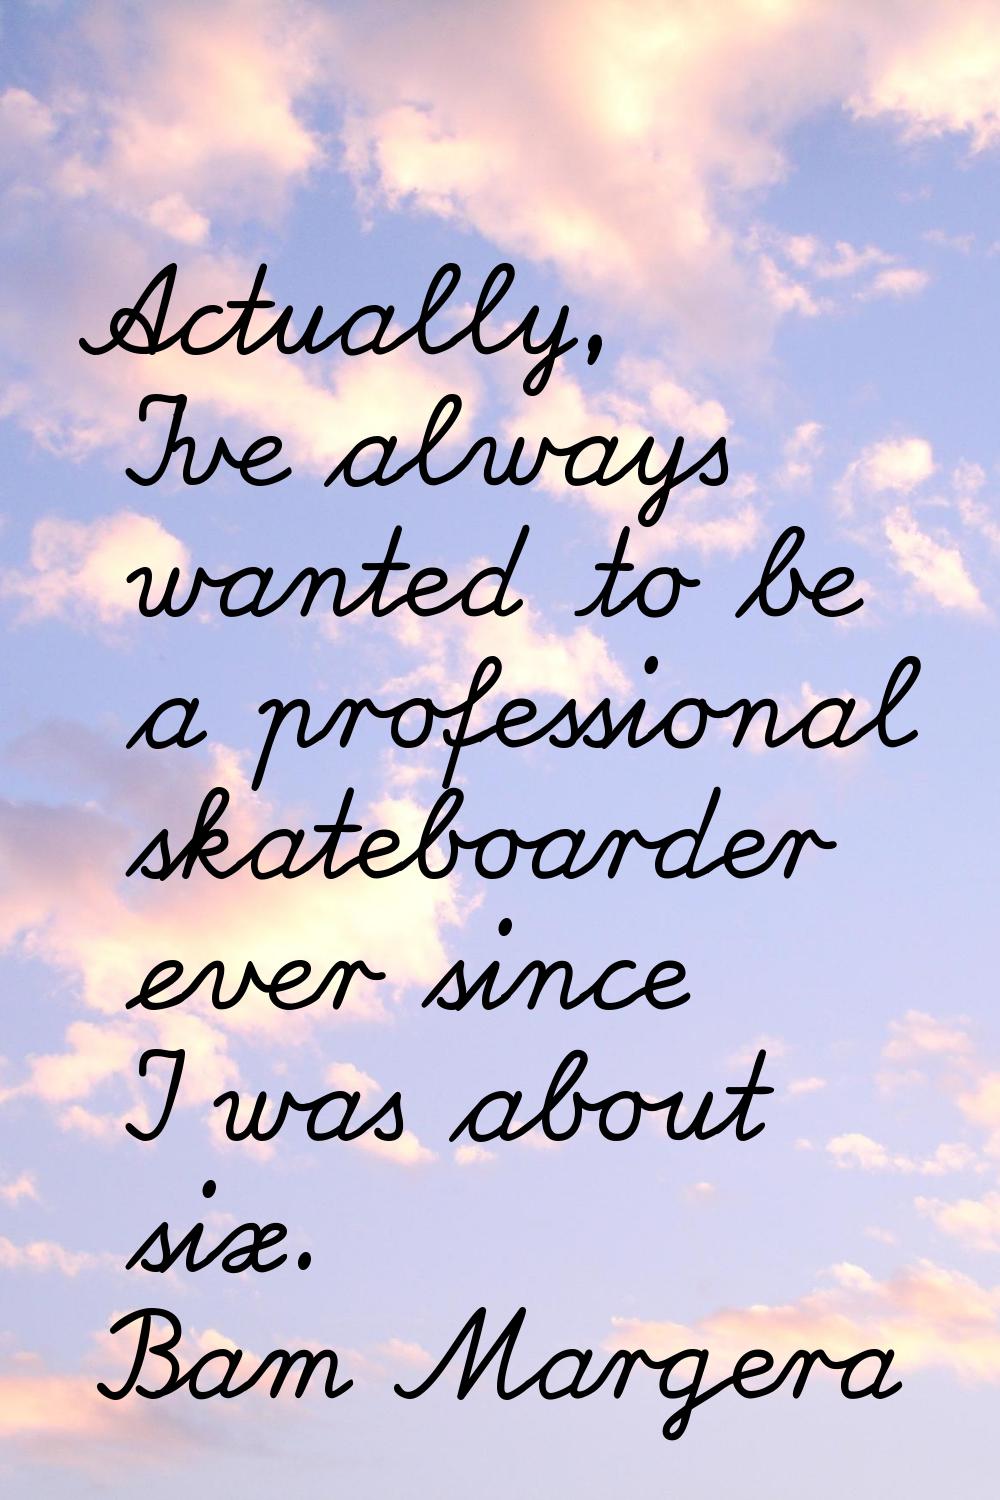 Actually, I've always wanted to be a professional skateboarder ever since I was about six.